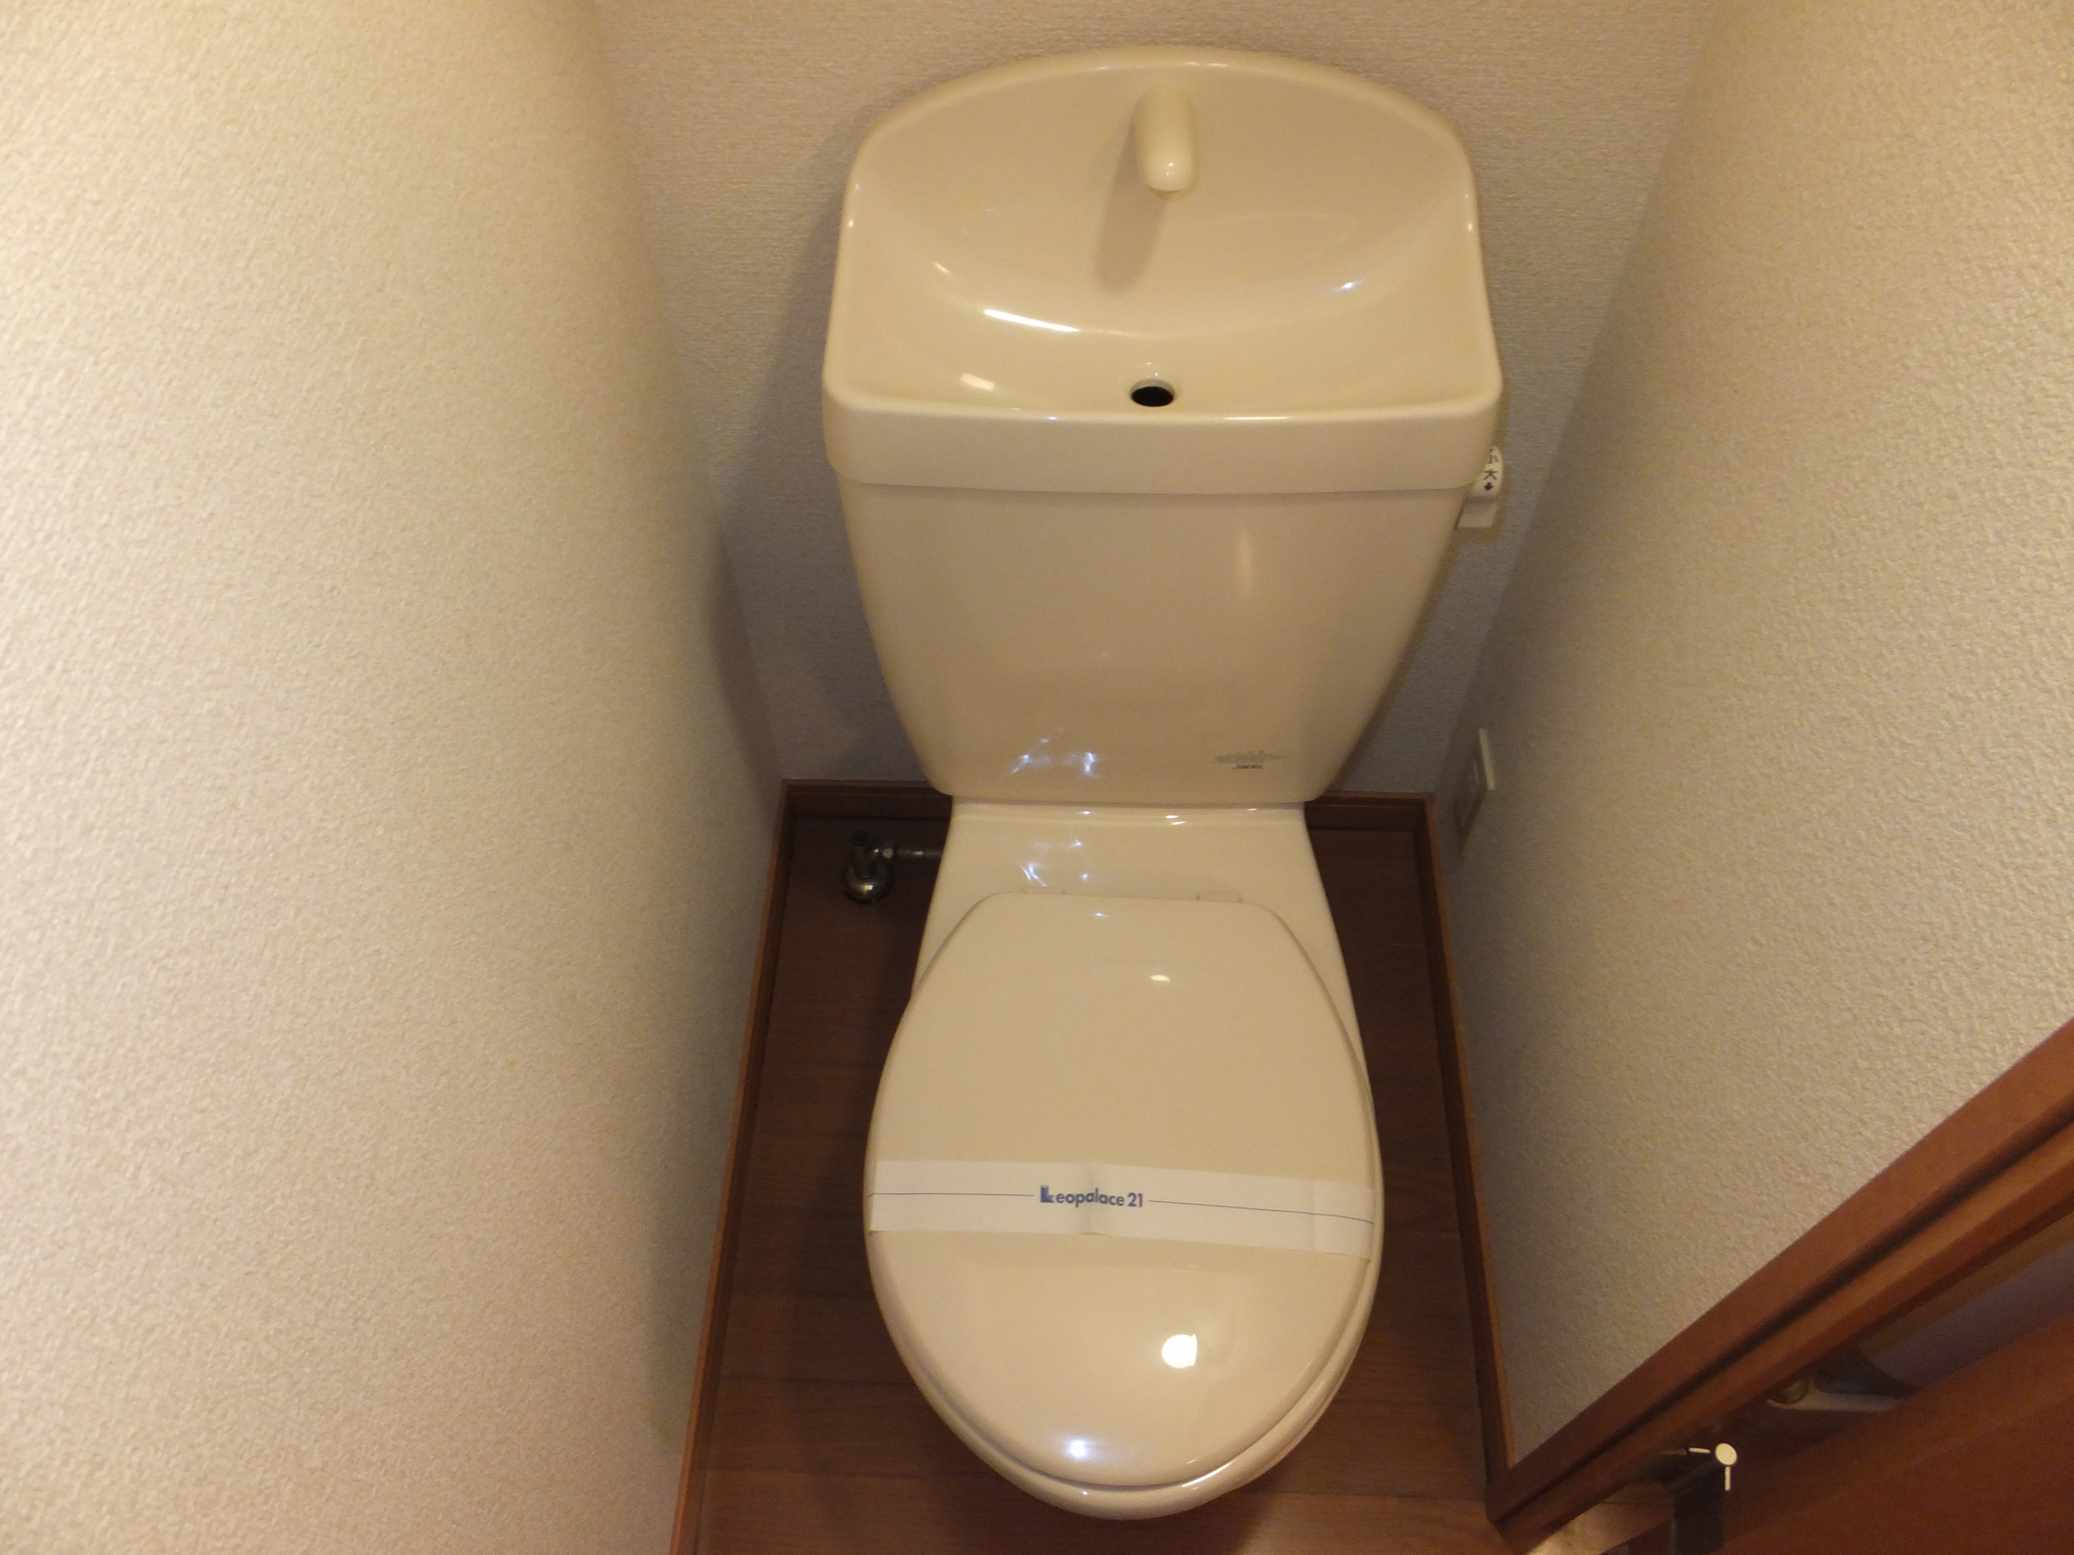 Toilet. It will be photos of the same type Property.